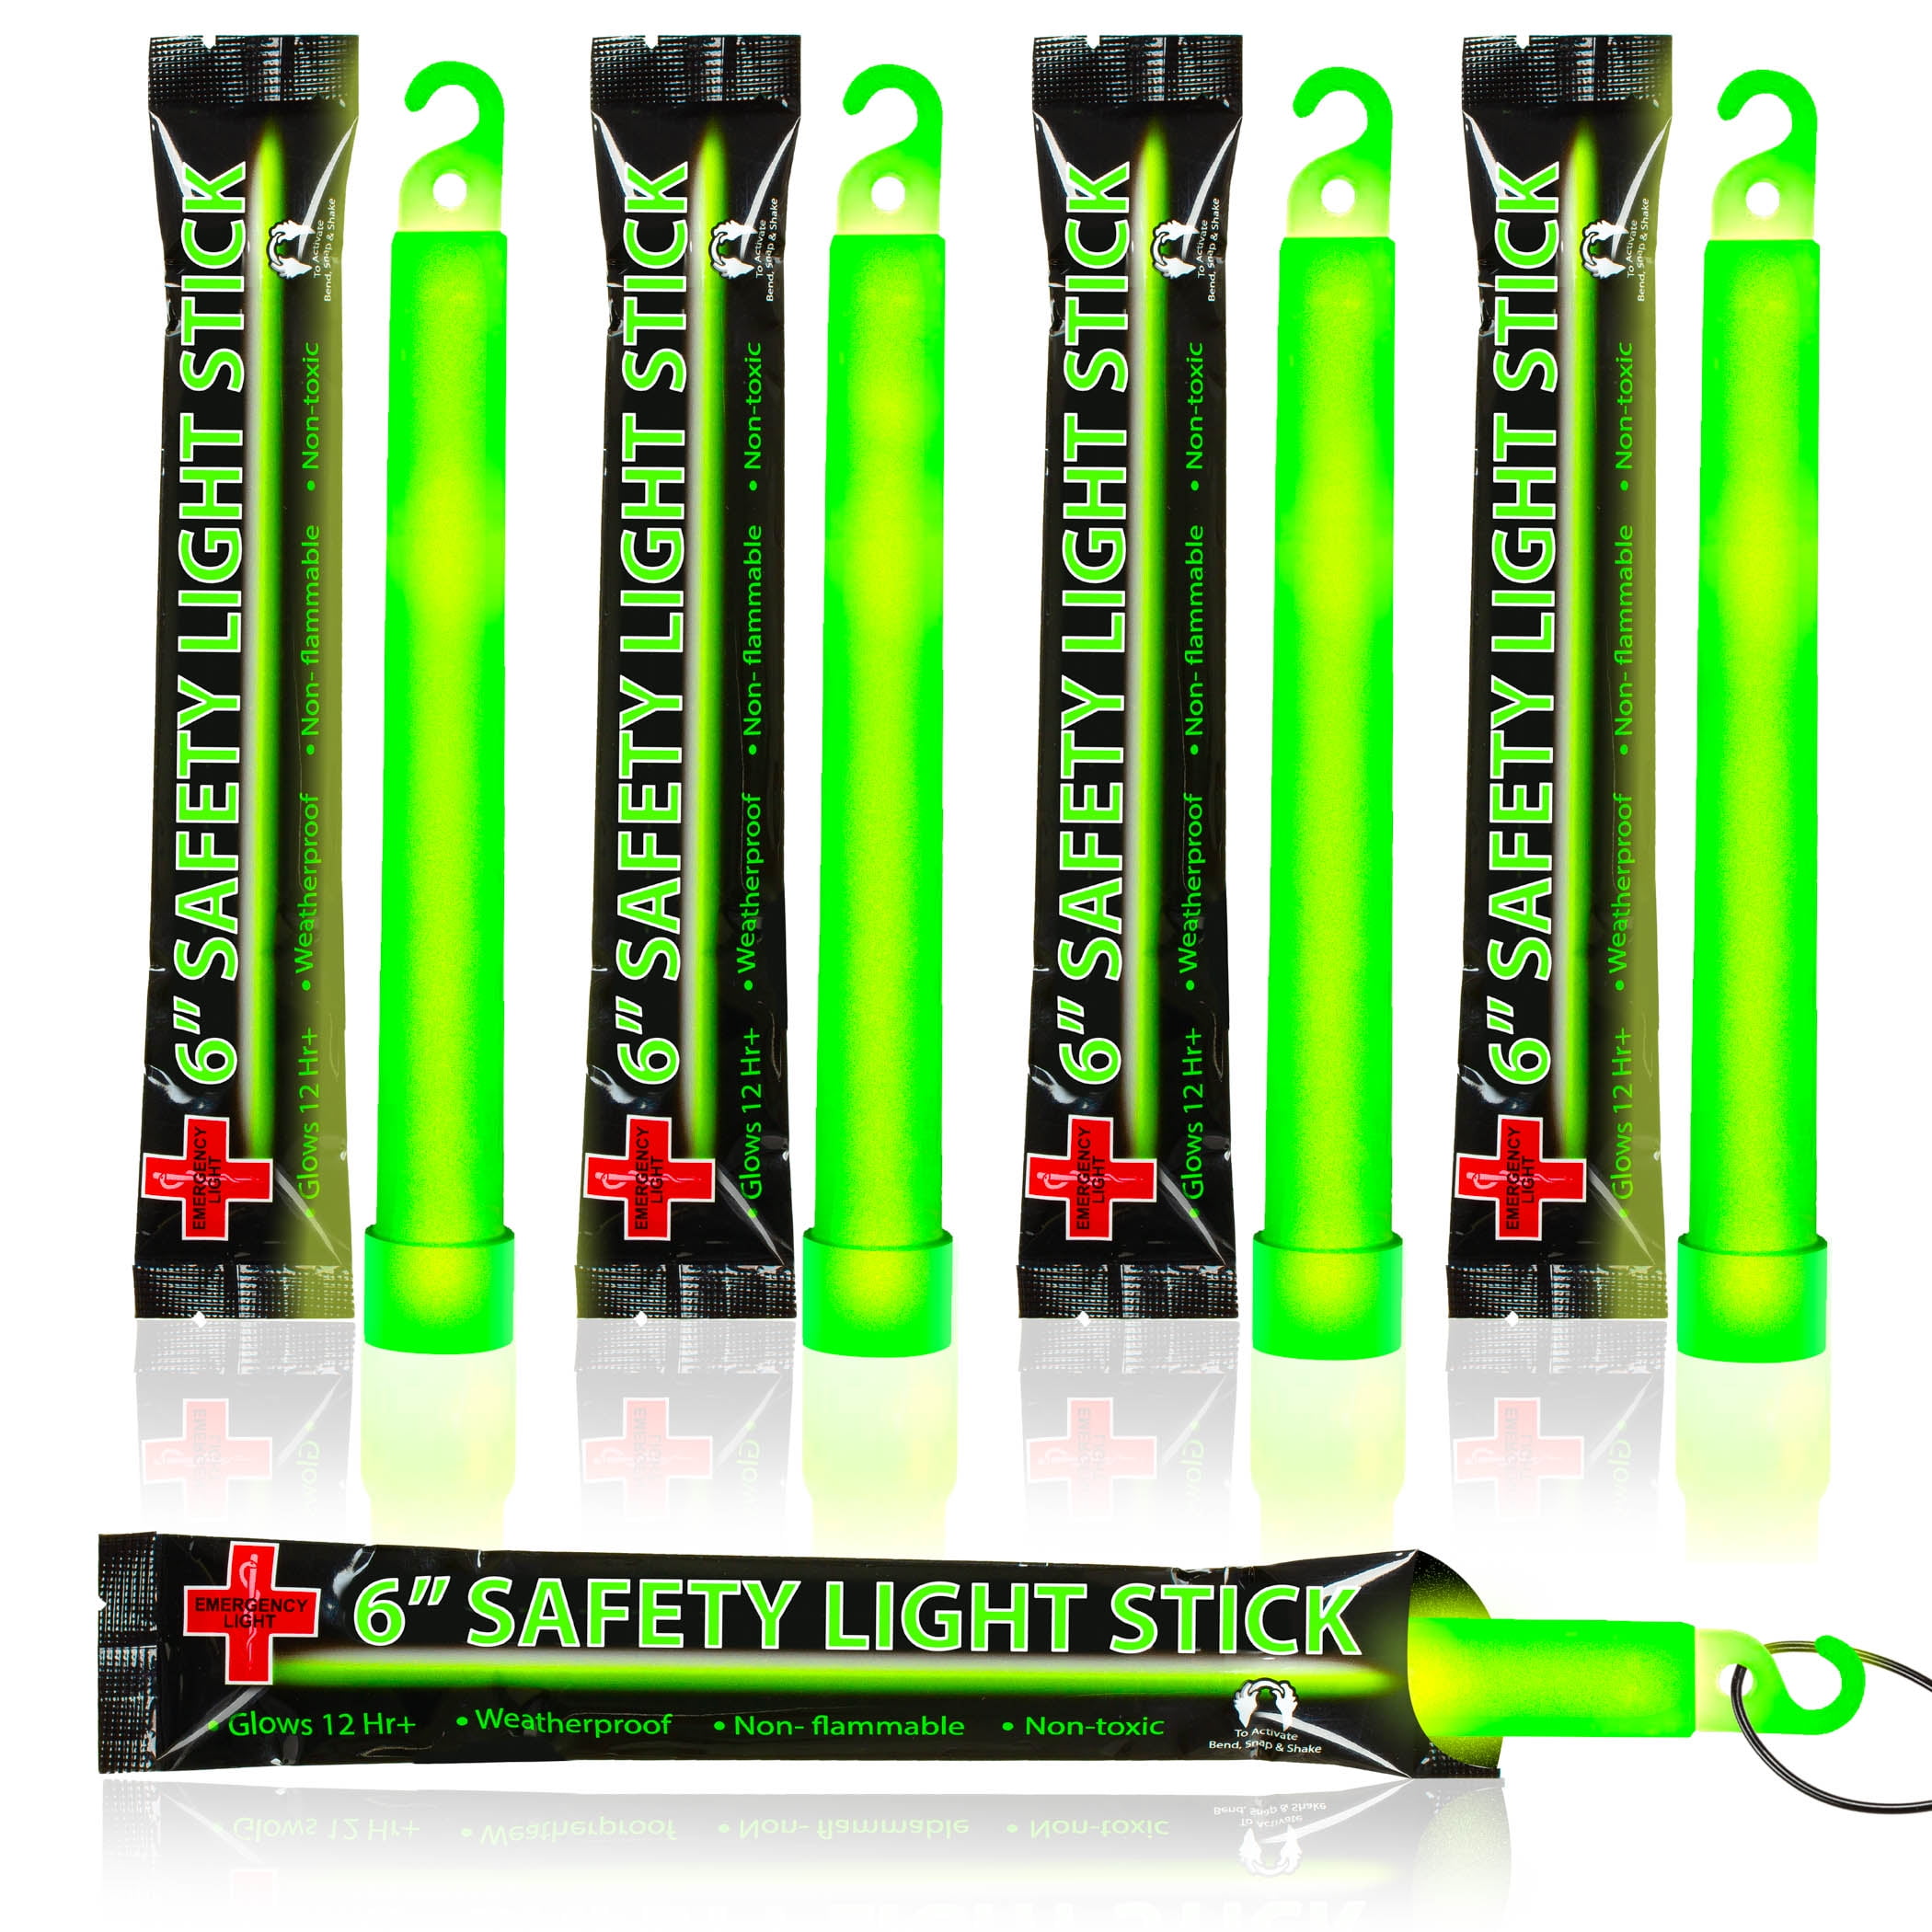 AIVANT Ultra Bright Large Glow Sticks - Long Last Lighting Over 12 Hours for Parties and Kids Playing, Emergency Light Sticks for Hurricane Supplies